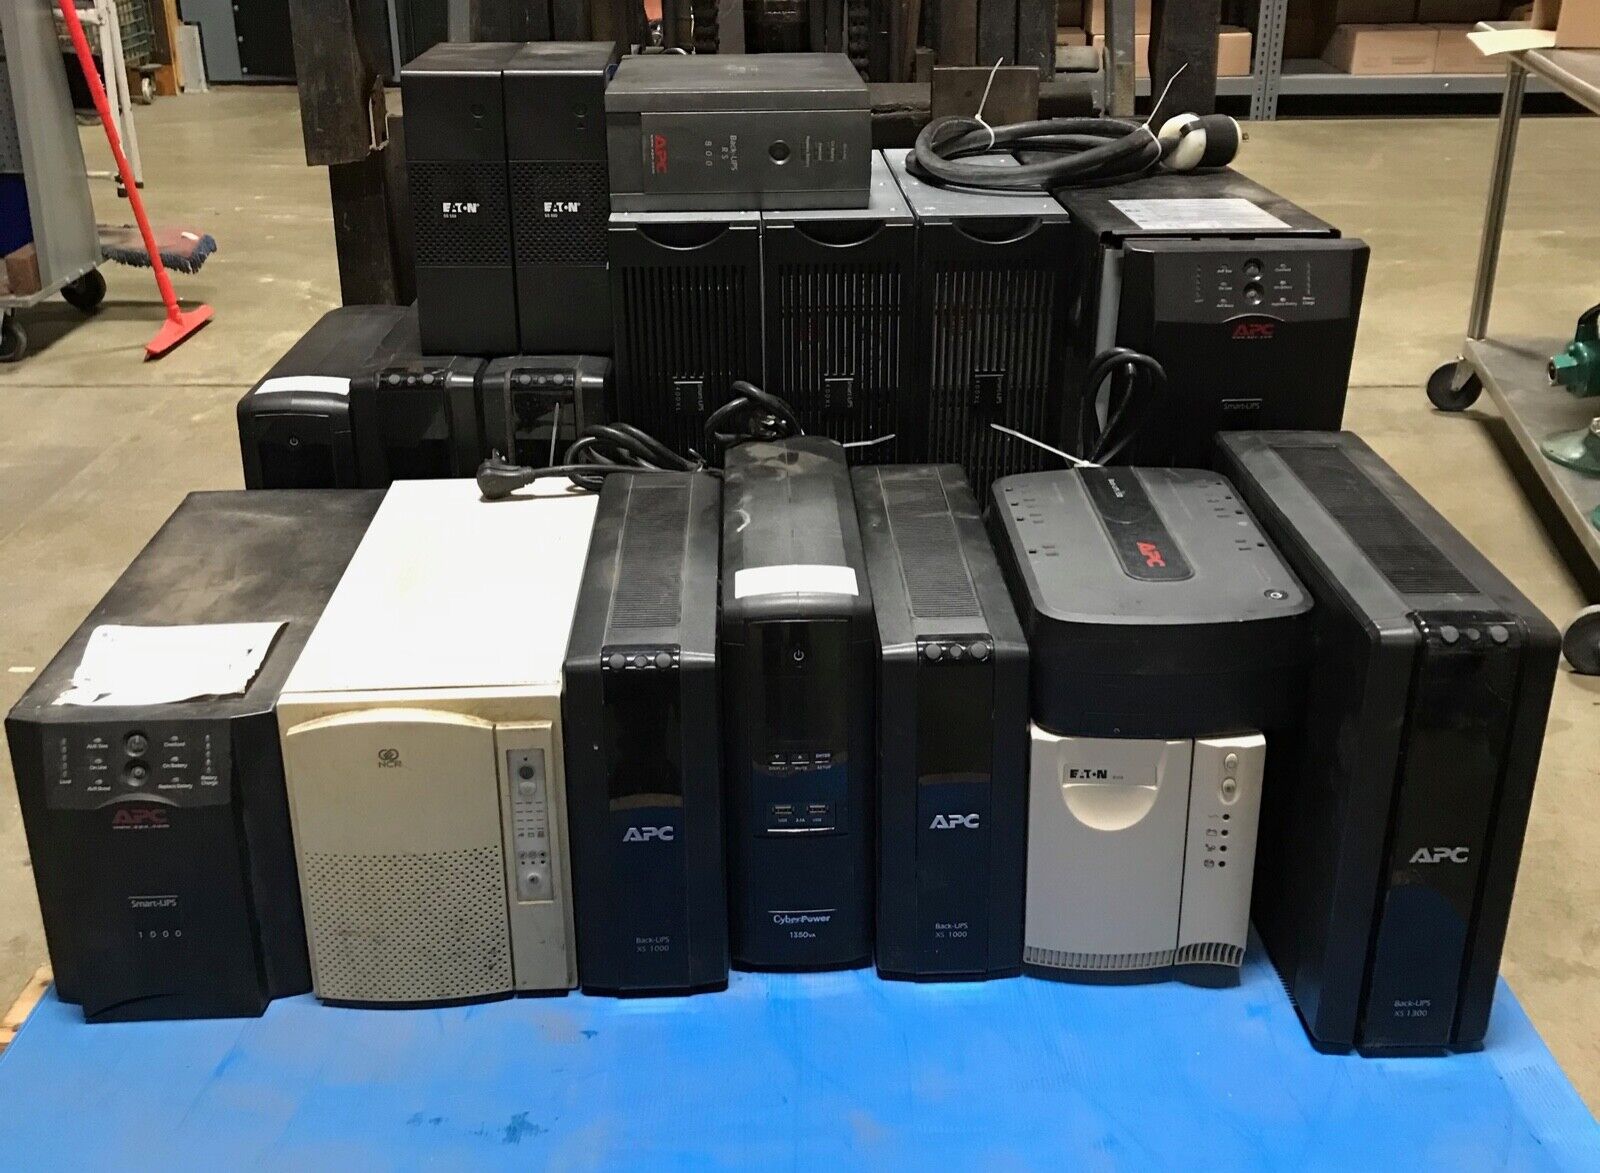 Large Assortment Of Used Non Working Battery Backups (Models APC, NCR, Eaton)